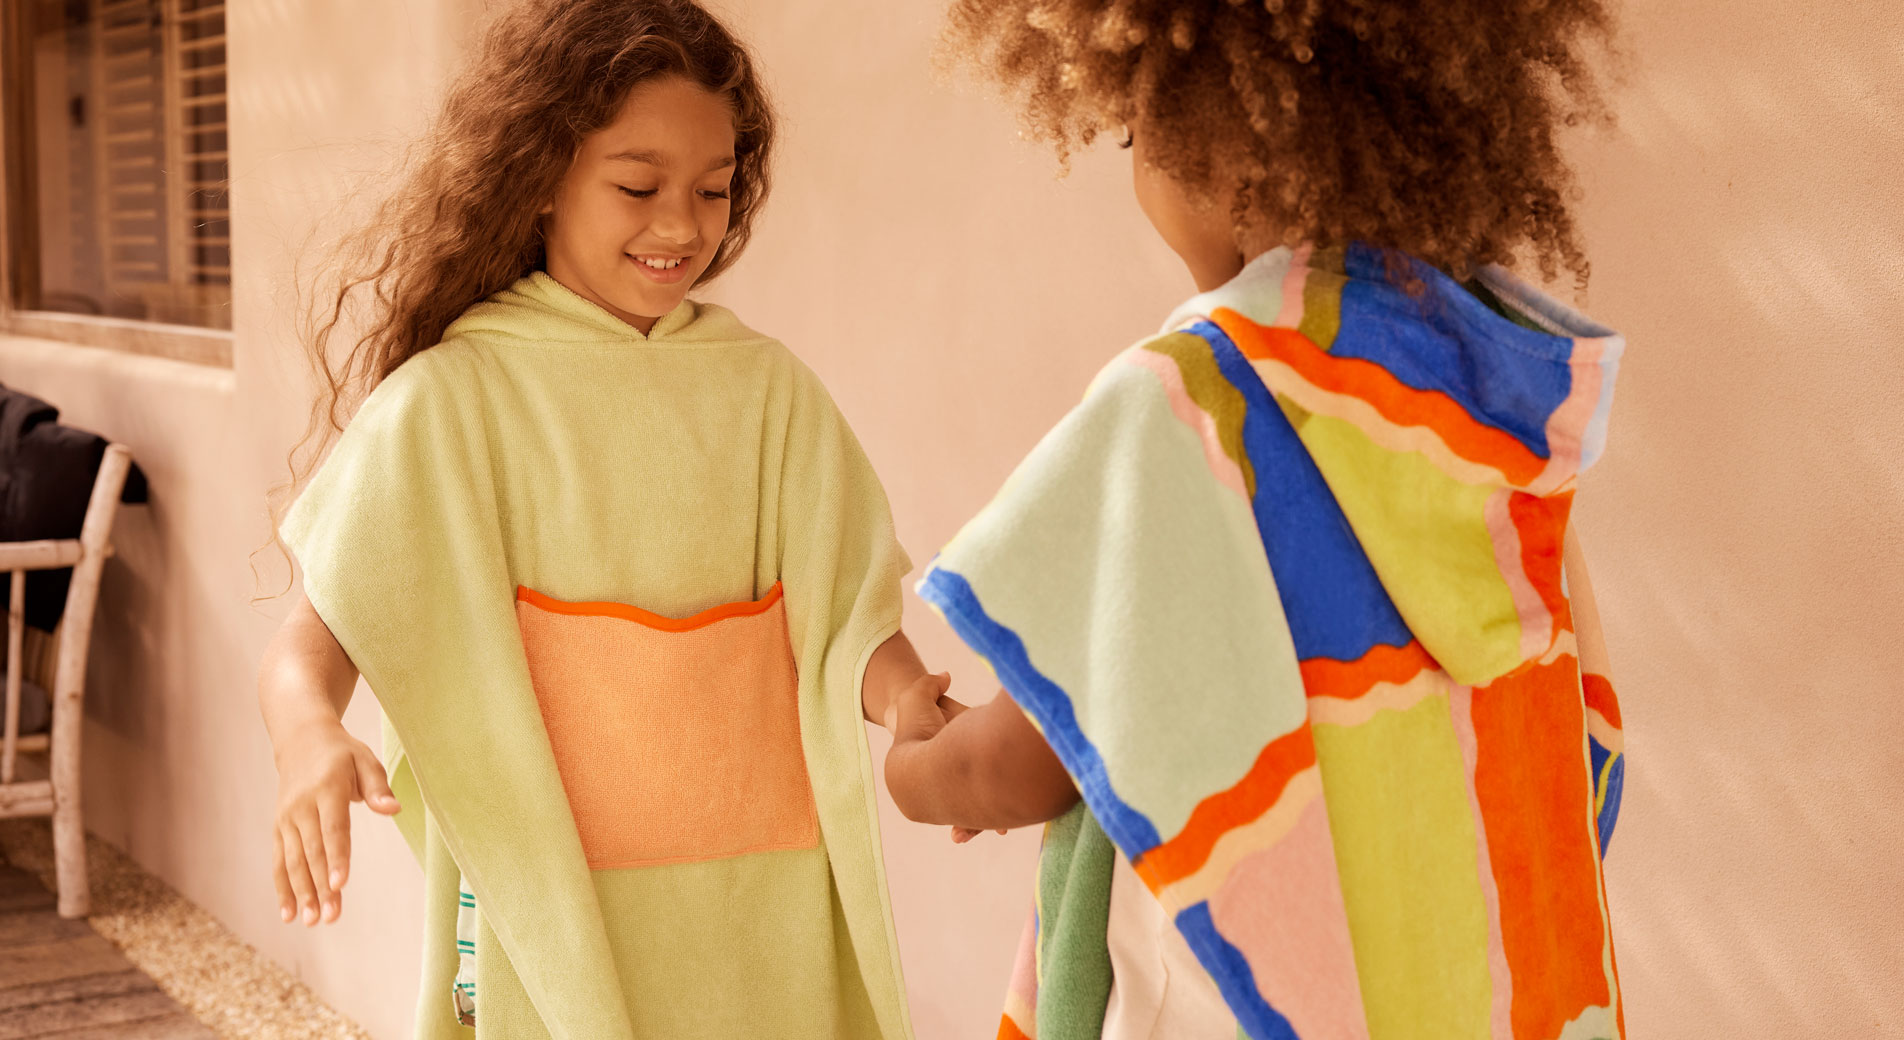 Two young kids wearing colourful Sheridan beach ponchos, playing a game